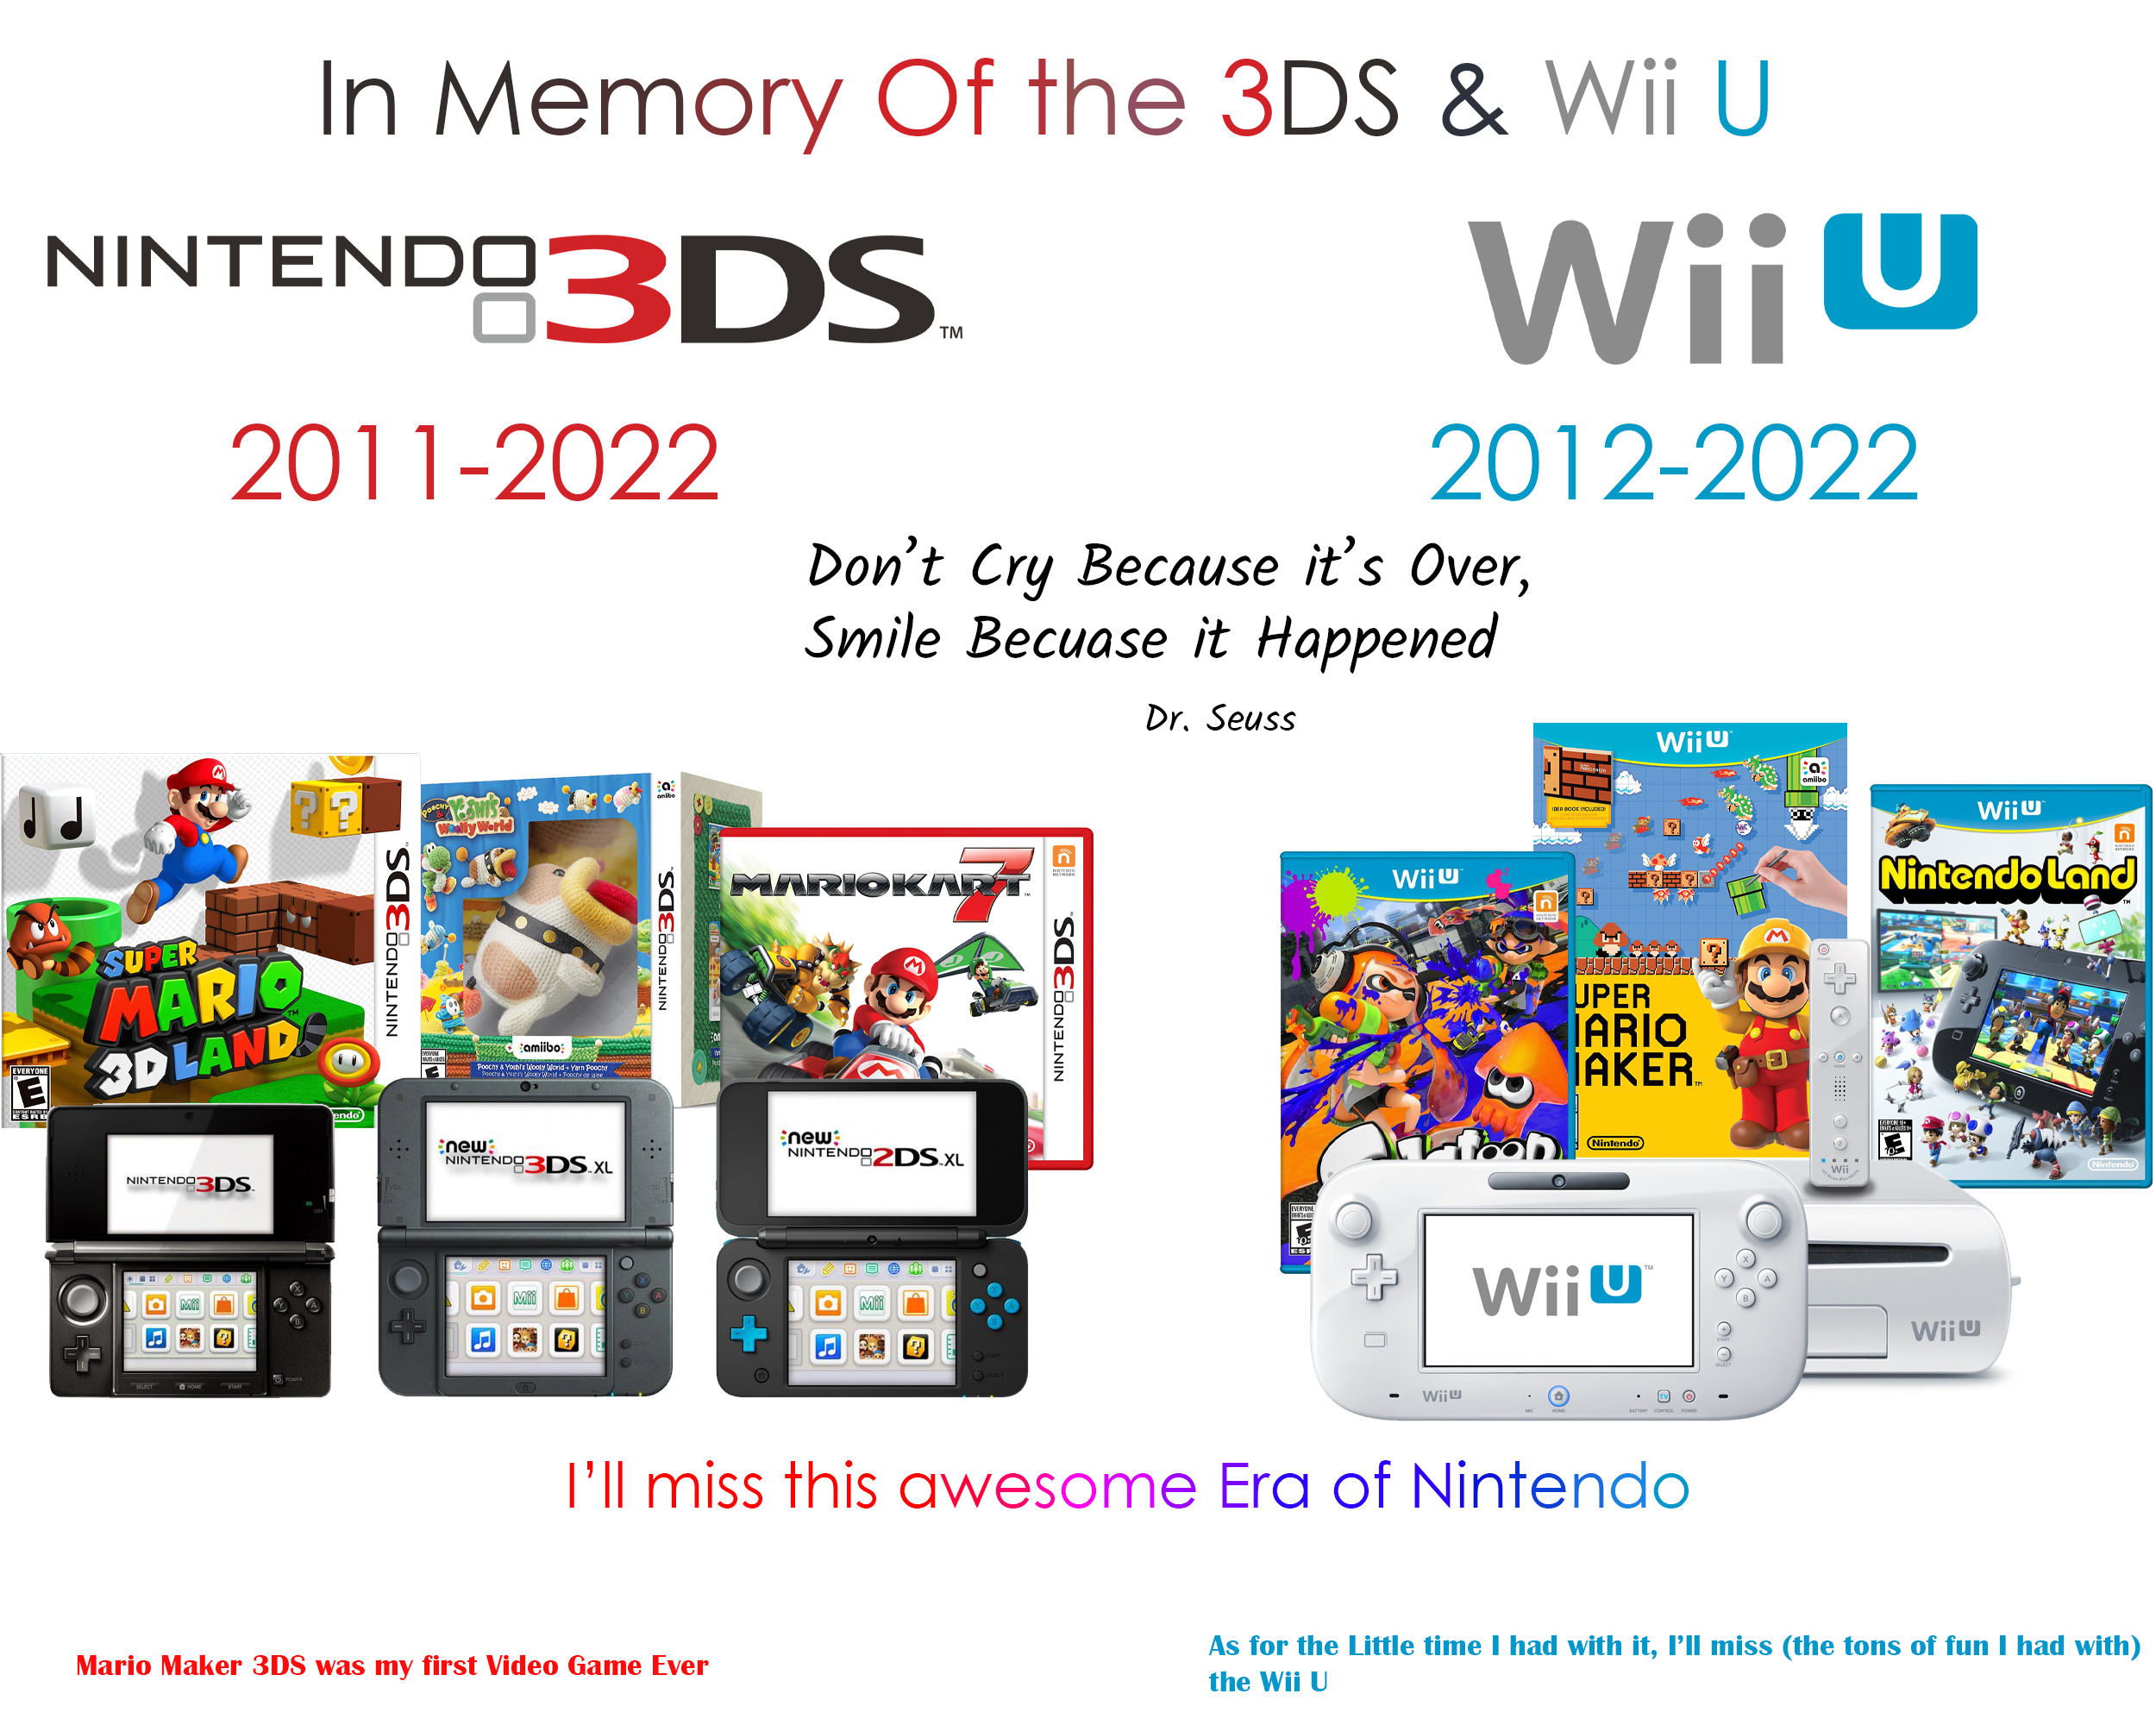 Nintendo eShop 3DS and Wii U are closed forever! by Object336Tetris909 on  DeviantArt